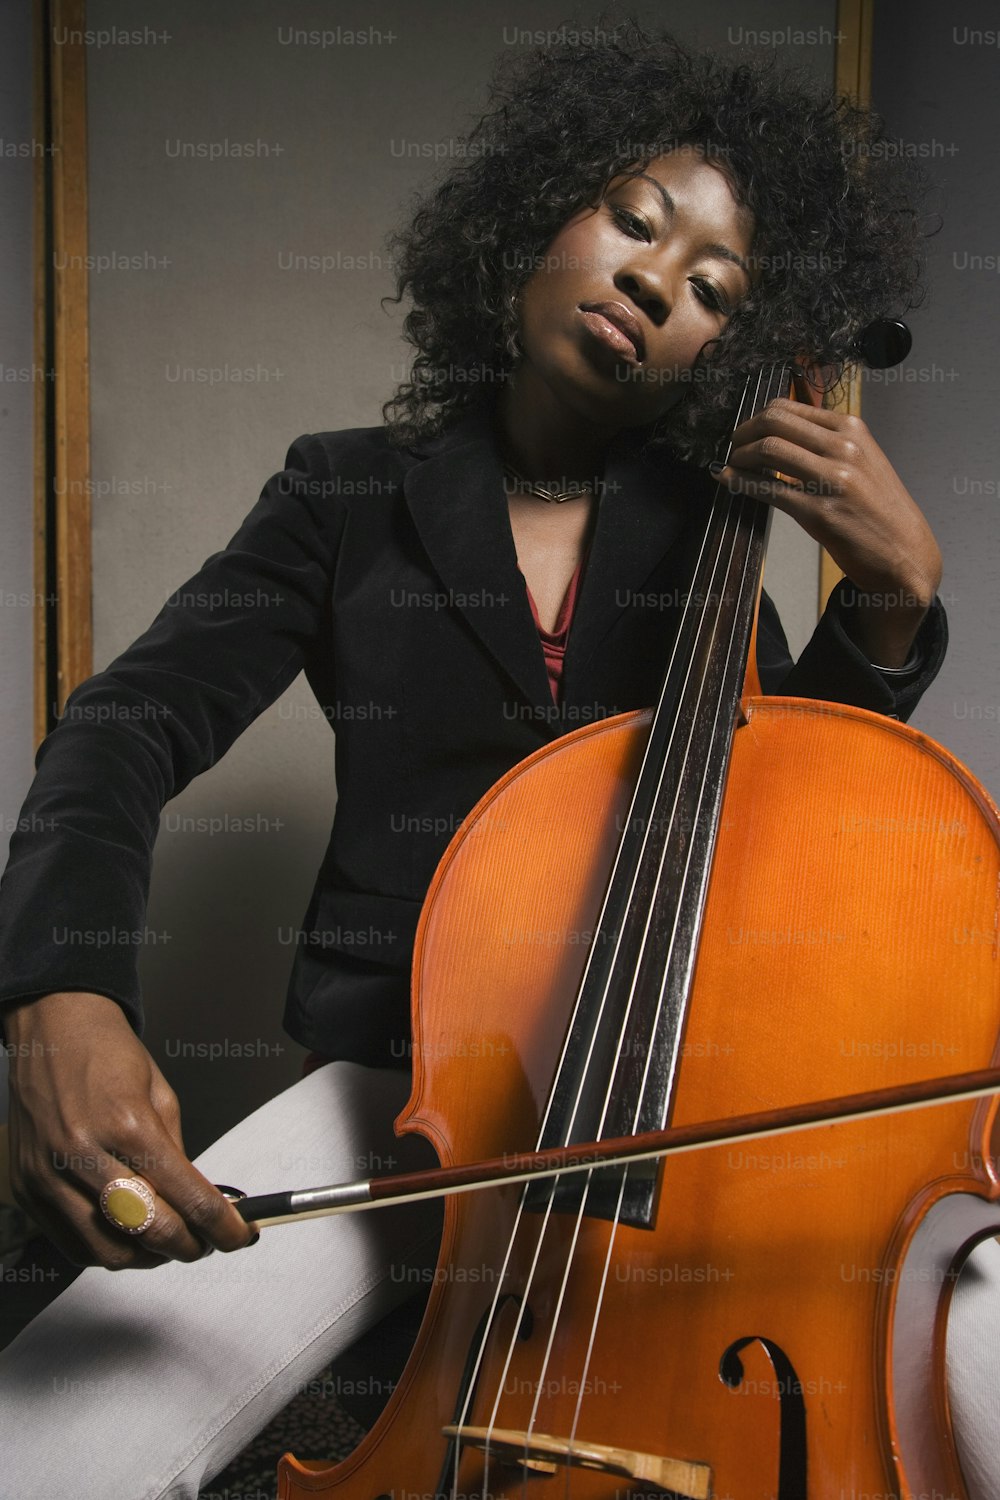 a woman in a suit holding a cello